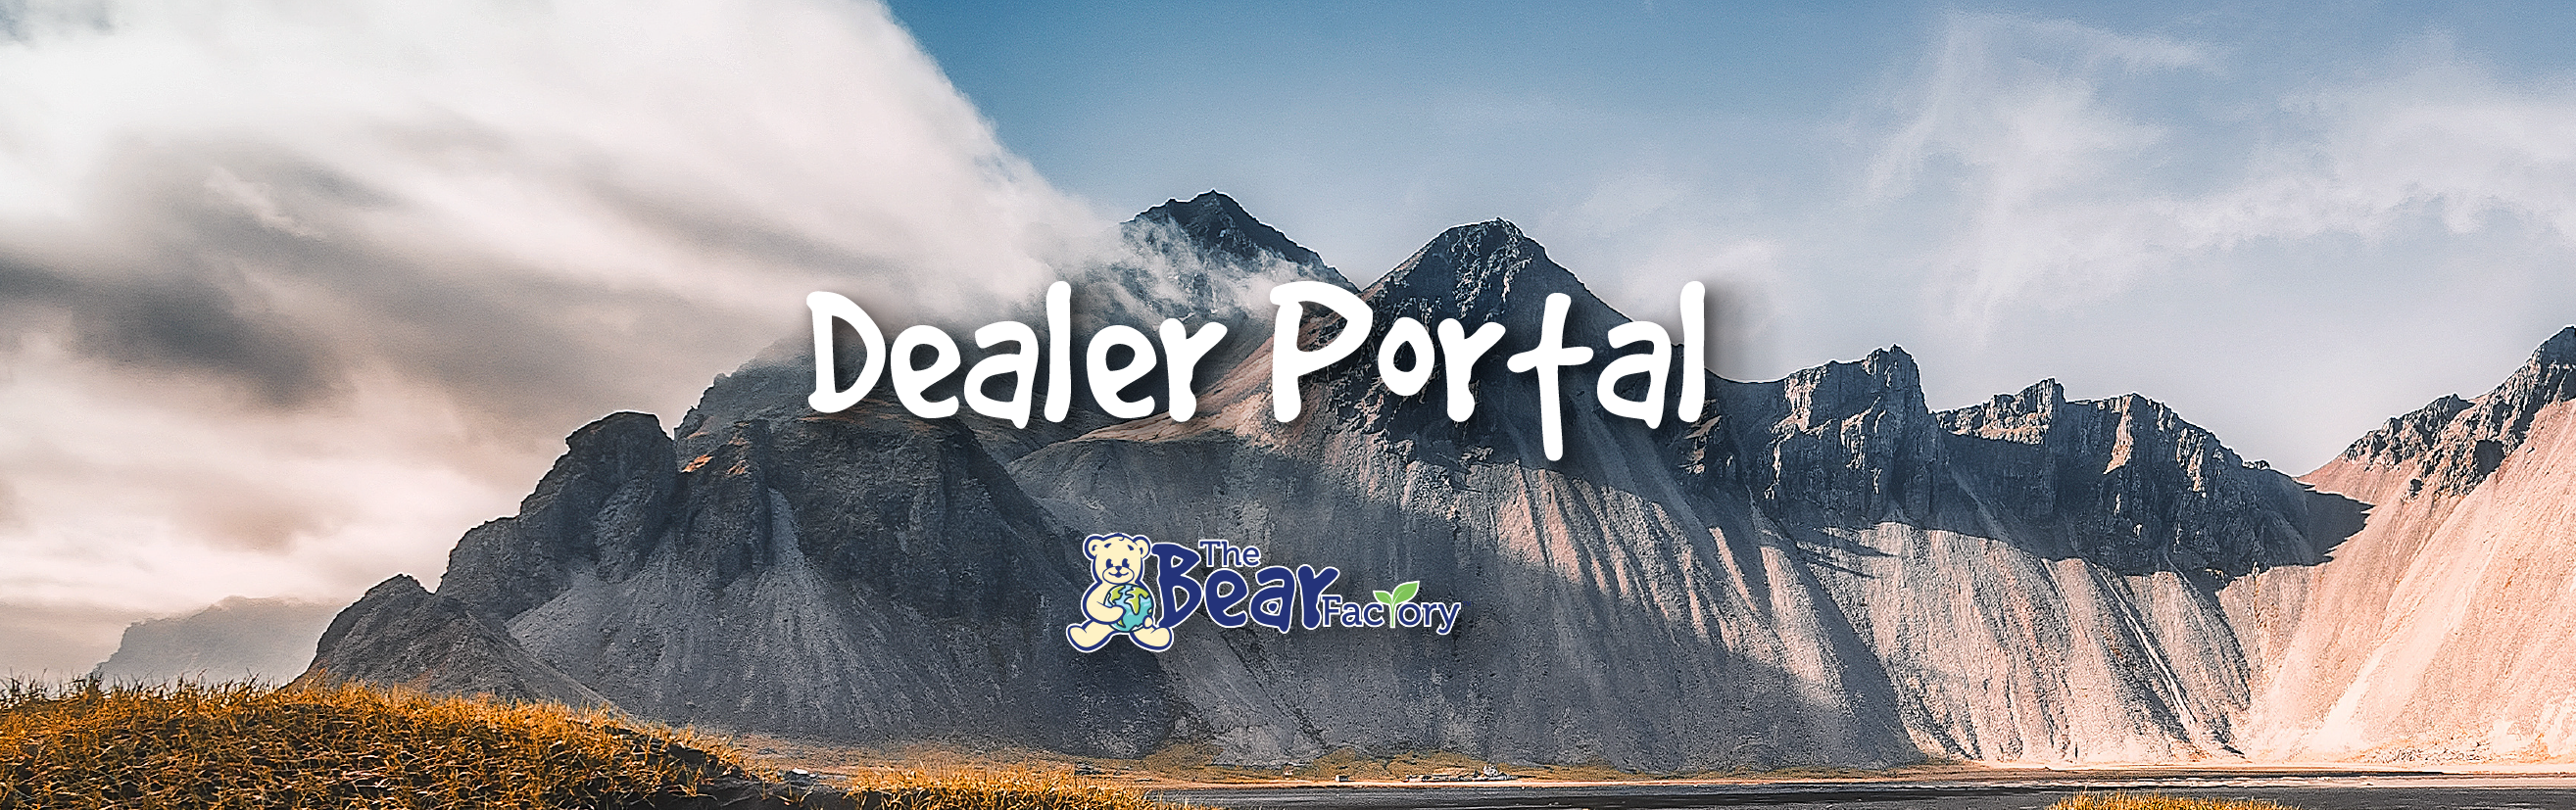 A mountain range photograph with The Bear Factory logo and the words "Dealer Portal" for certified dealers